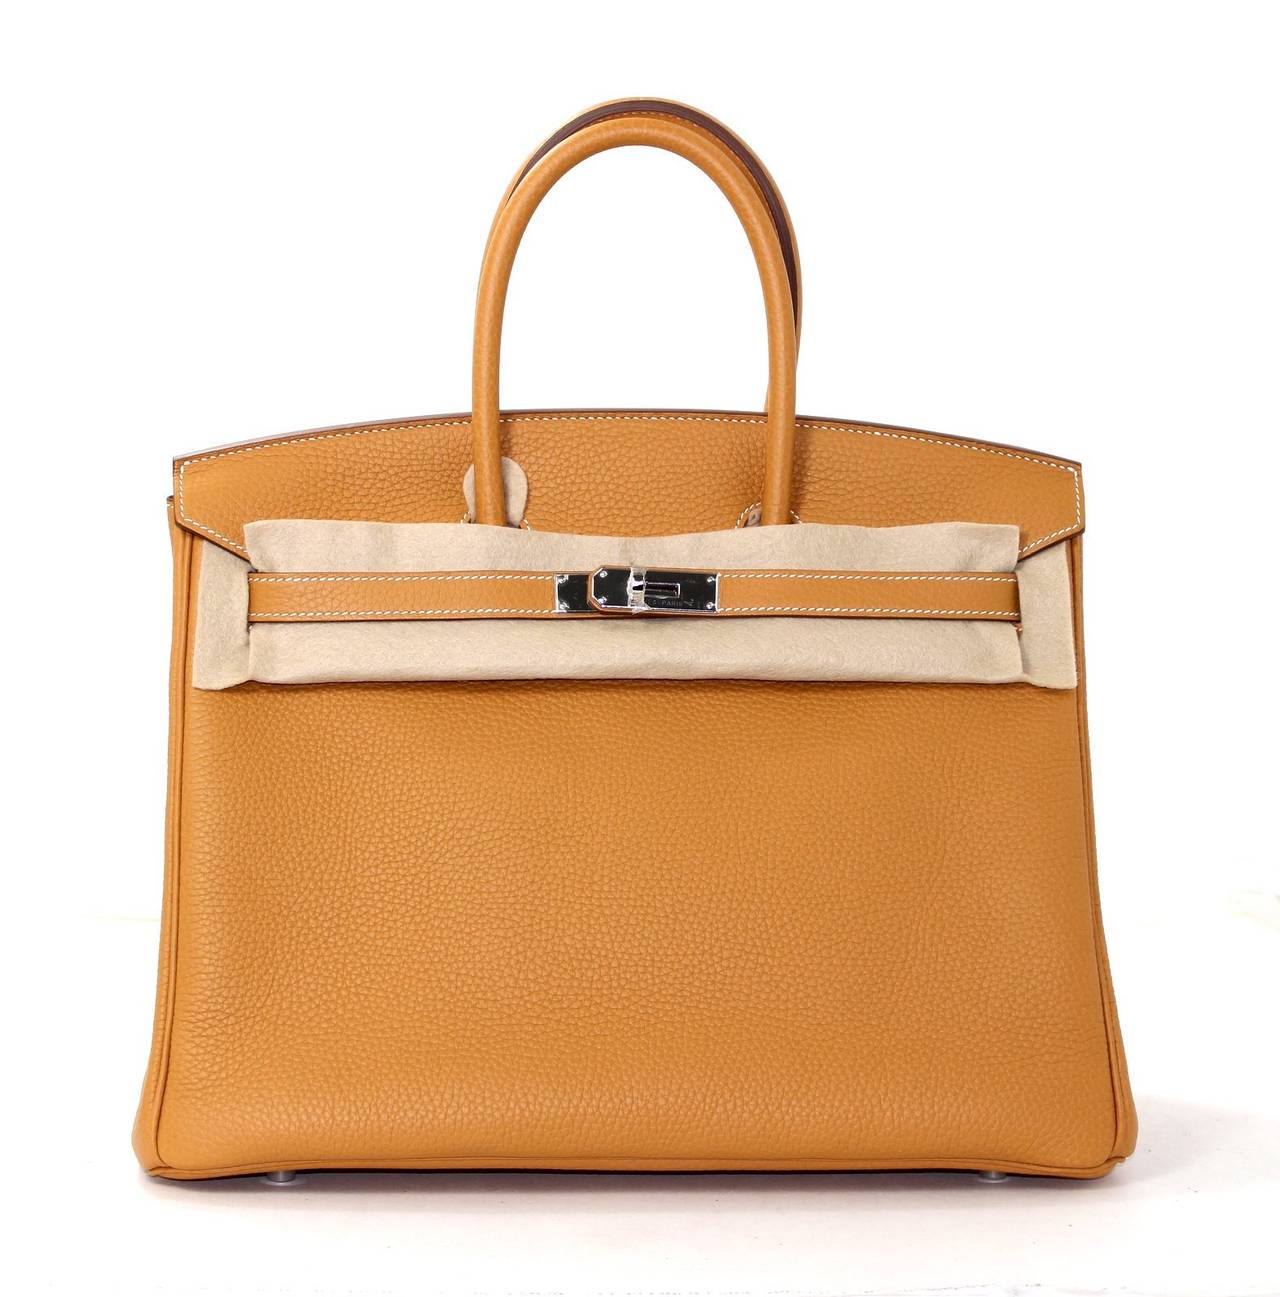 Hermes Fjord Leather Birkin Bag- 35 cm in Sable Brown with PHW For Sale 5